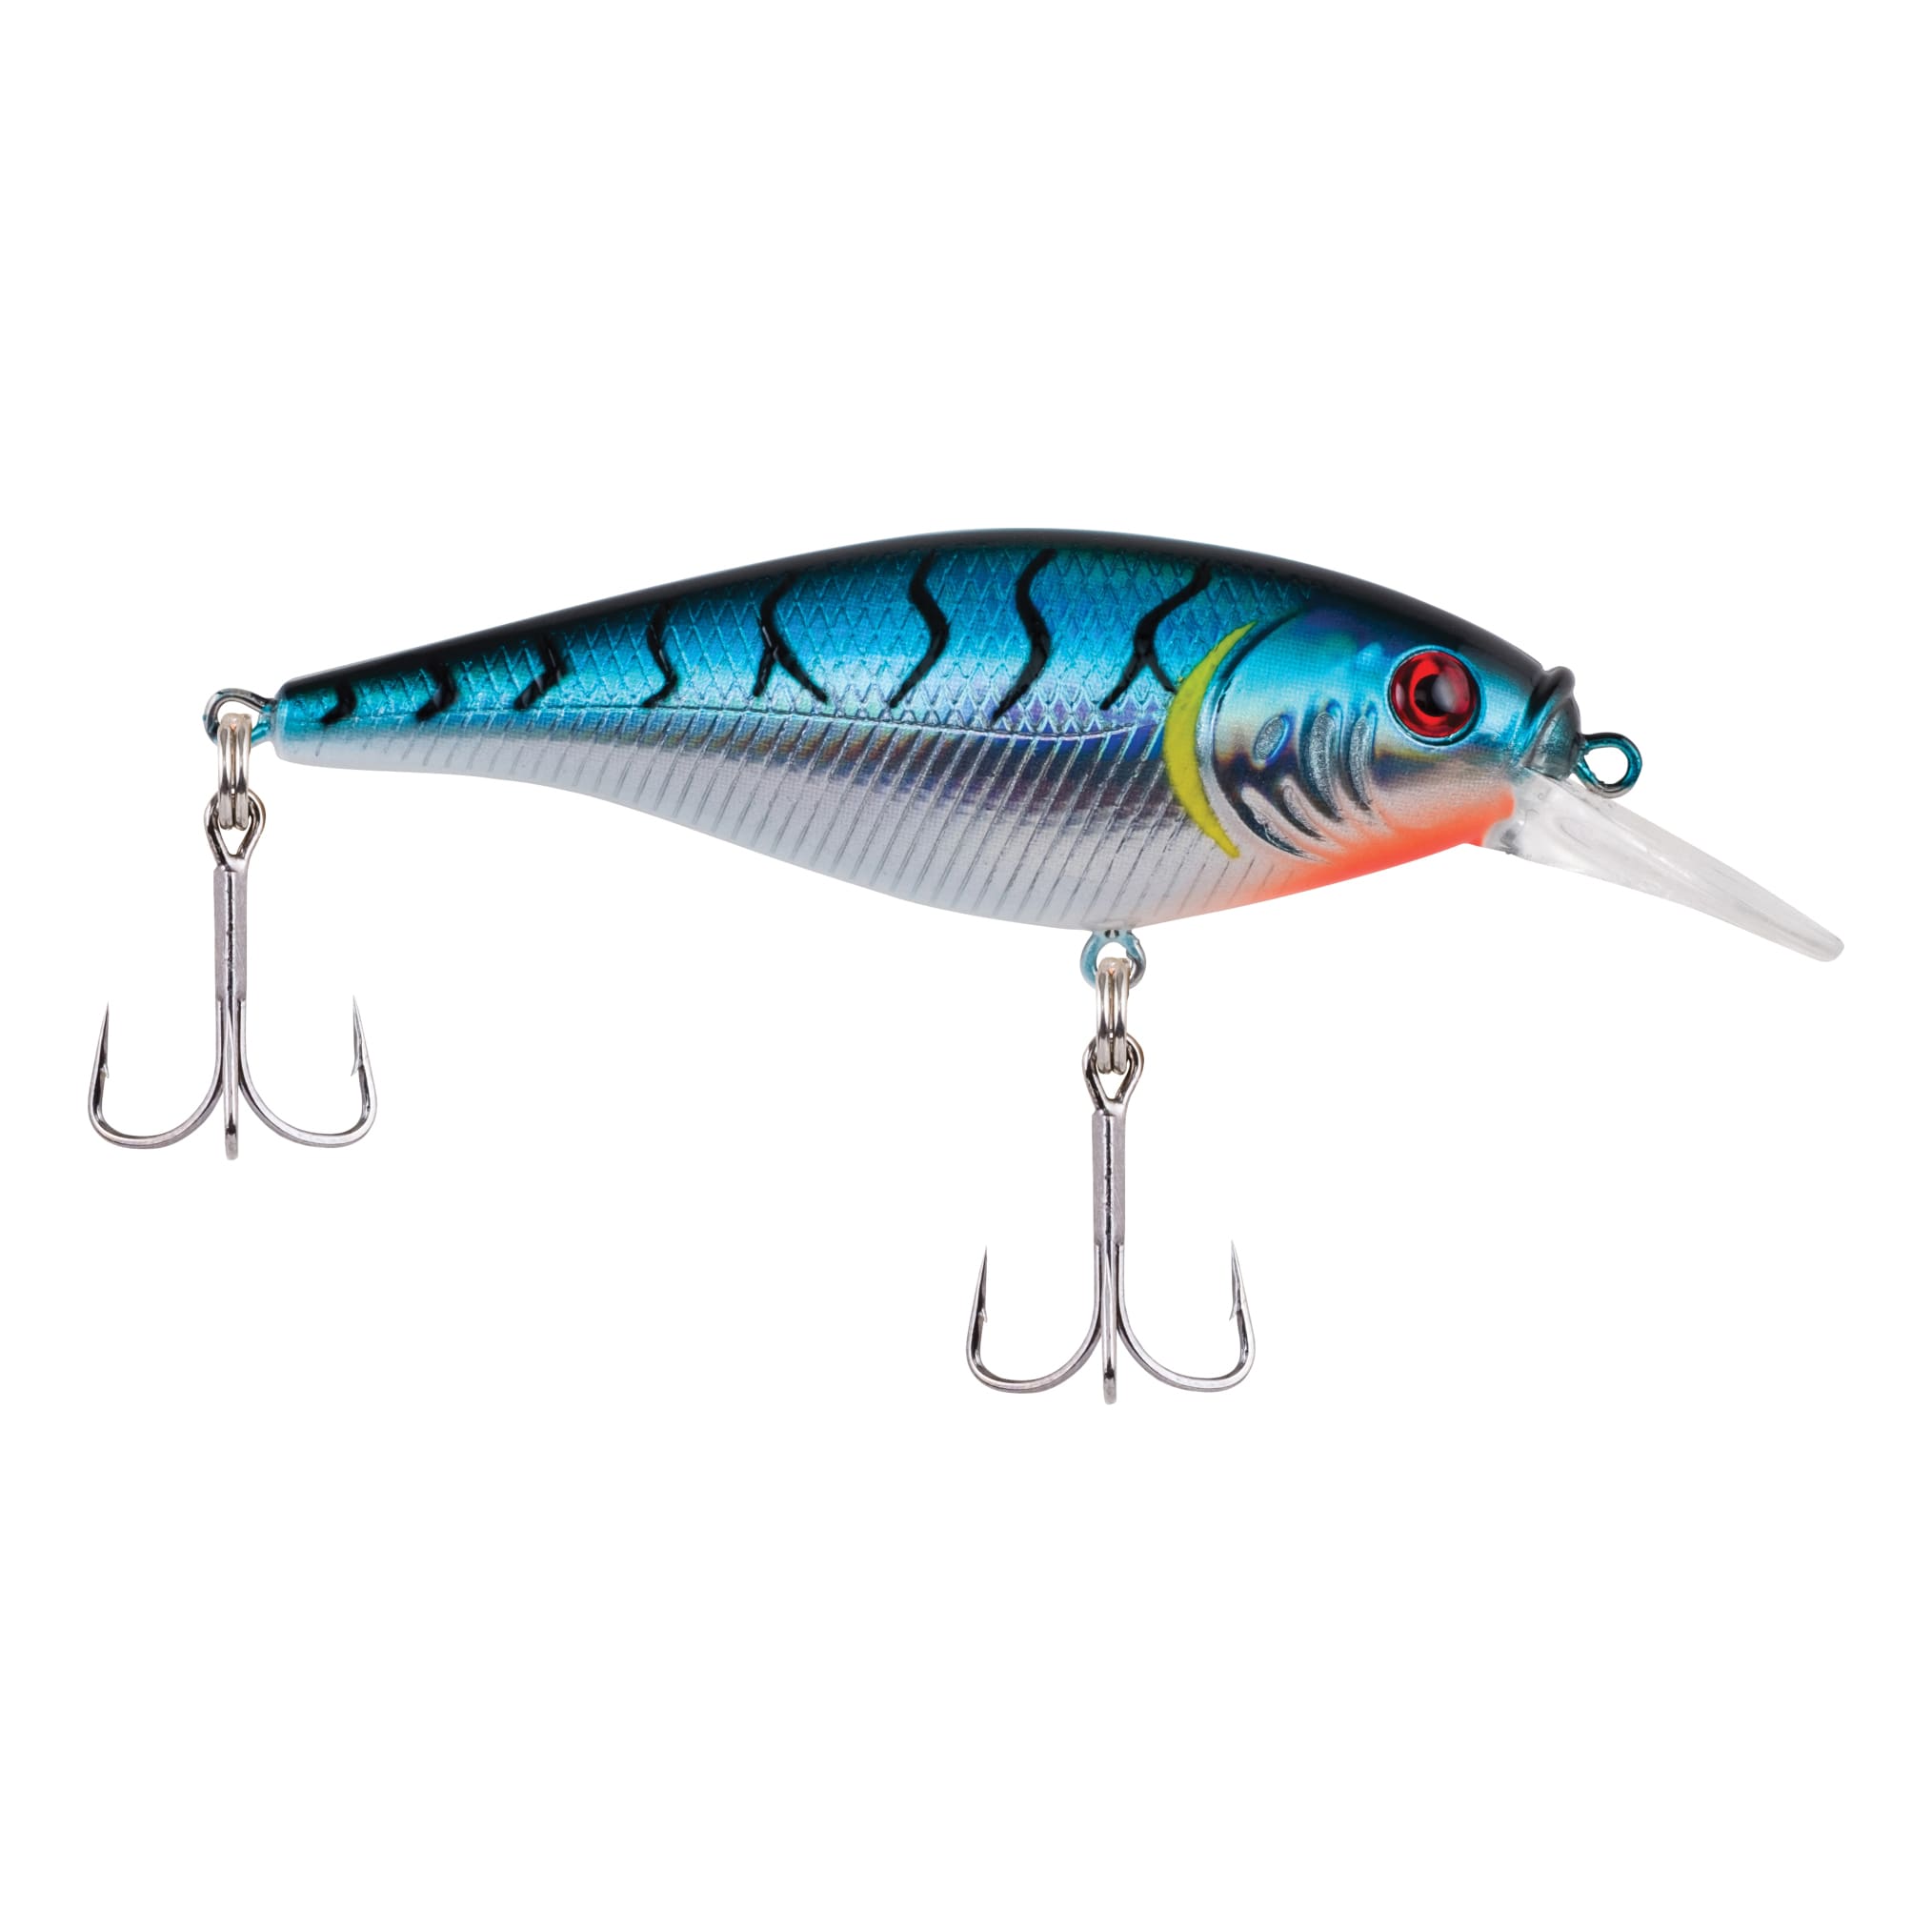 DYNWAVECA Topwater Fishing Lure Floating Lure Lifelike Plopping Bass Lure  Top Water Bass Lure for Trout, Bass, Perch Freshwater Fishing Blue 